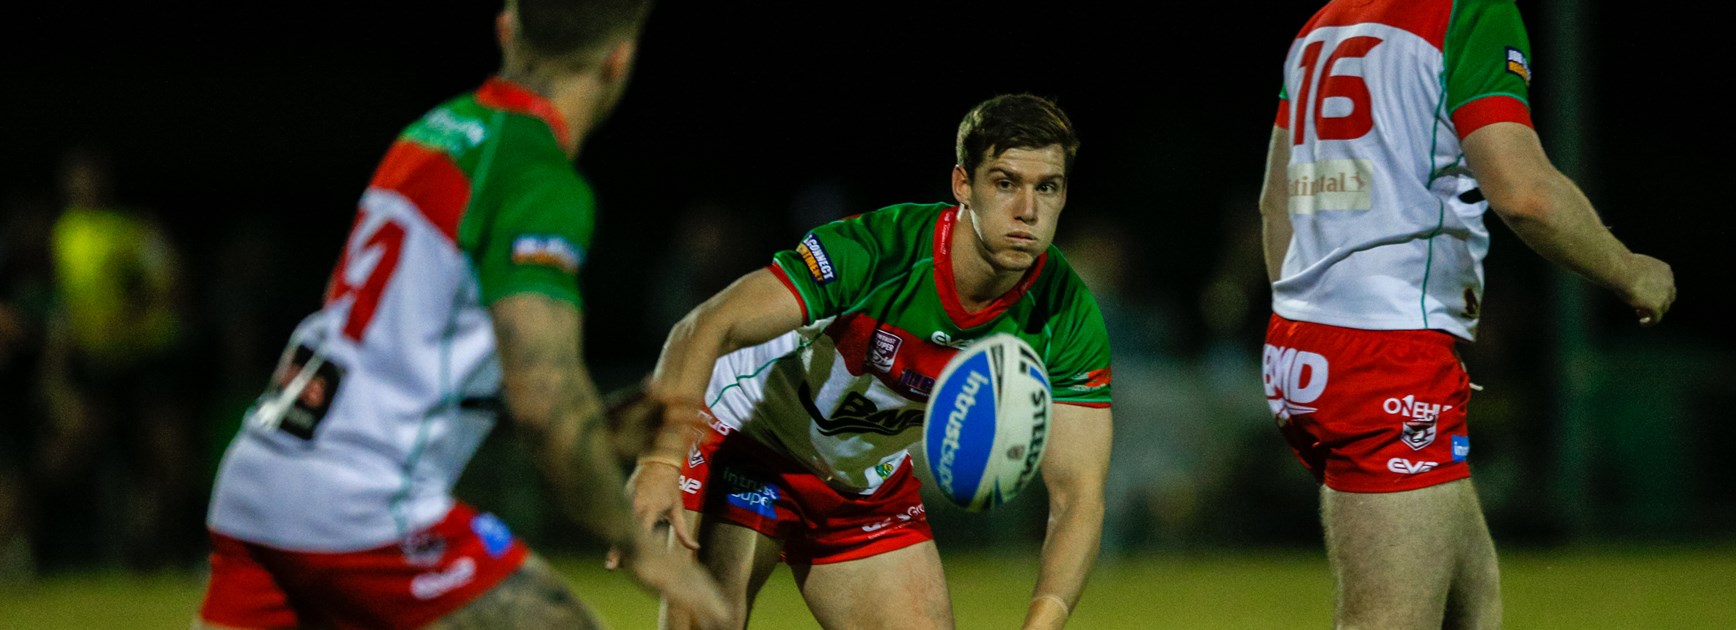 Wynnum Manly prove too strong for Cutters